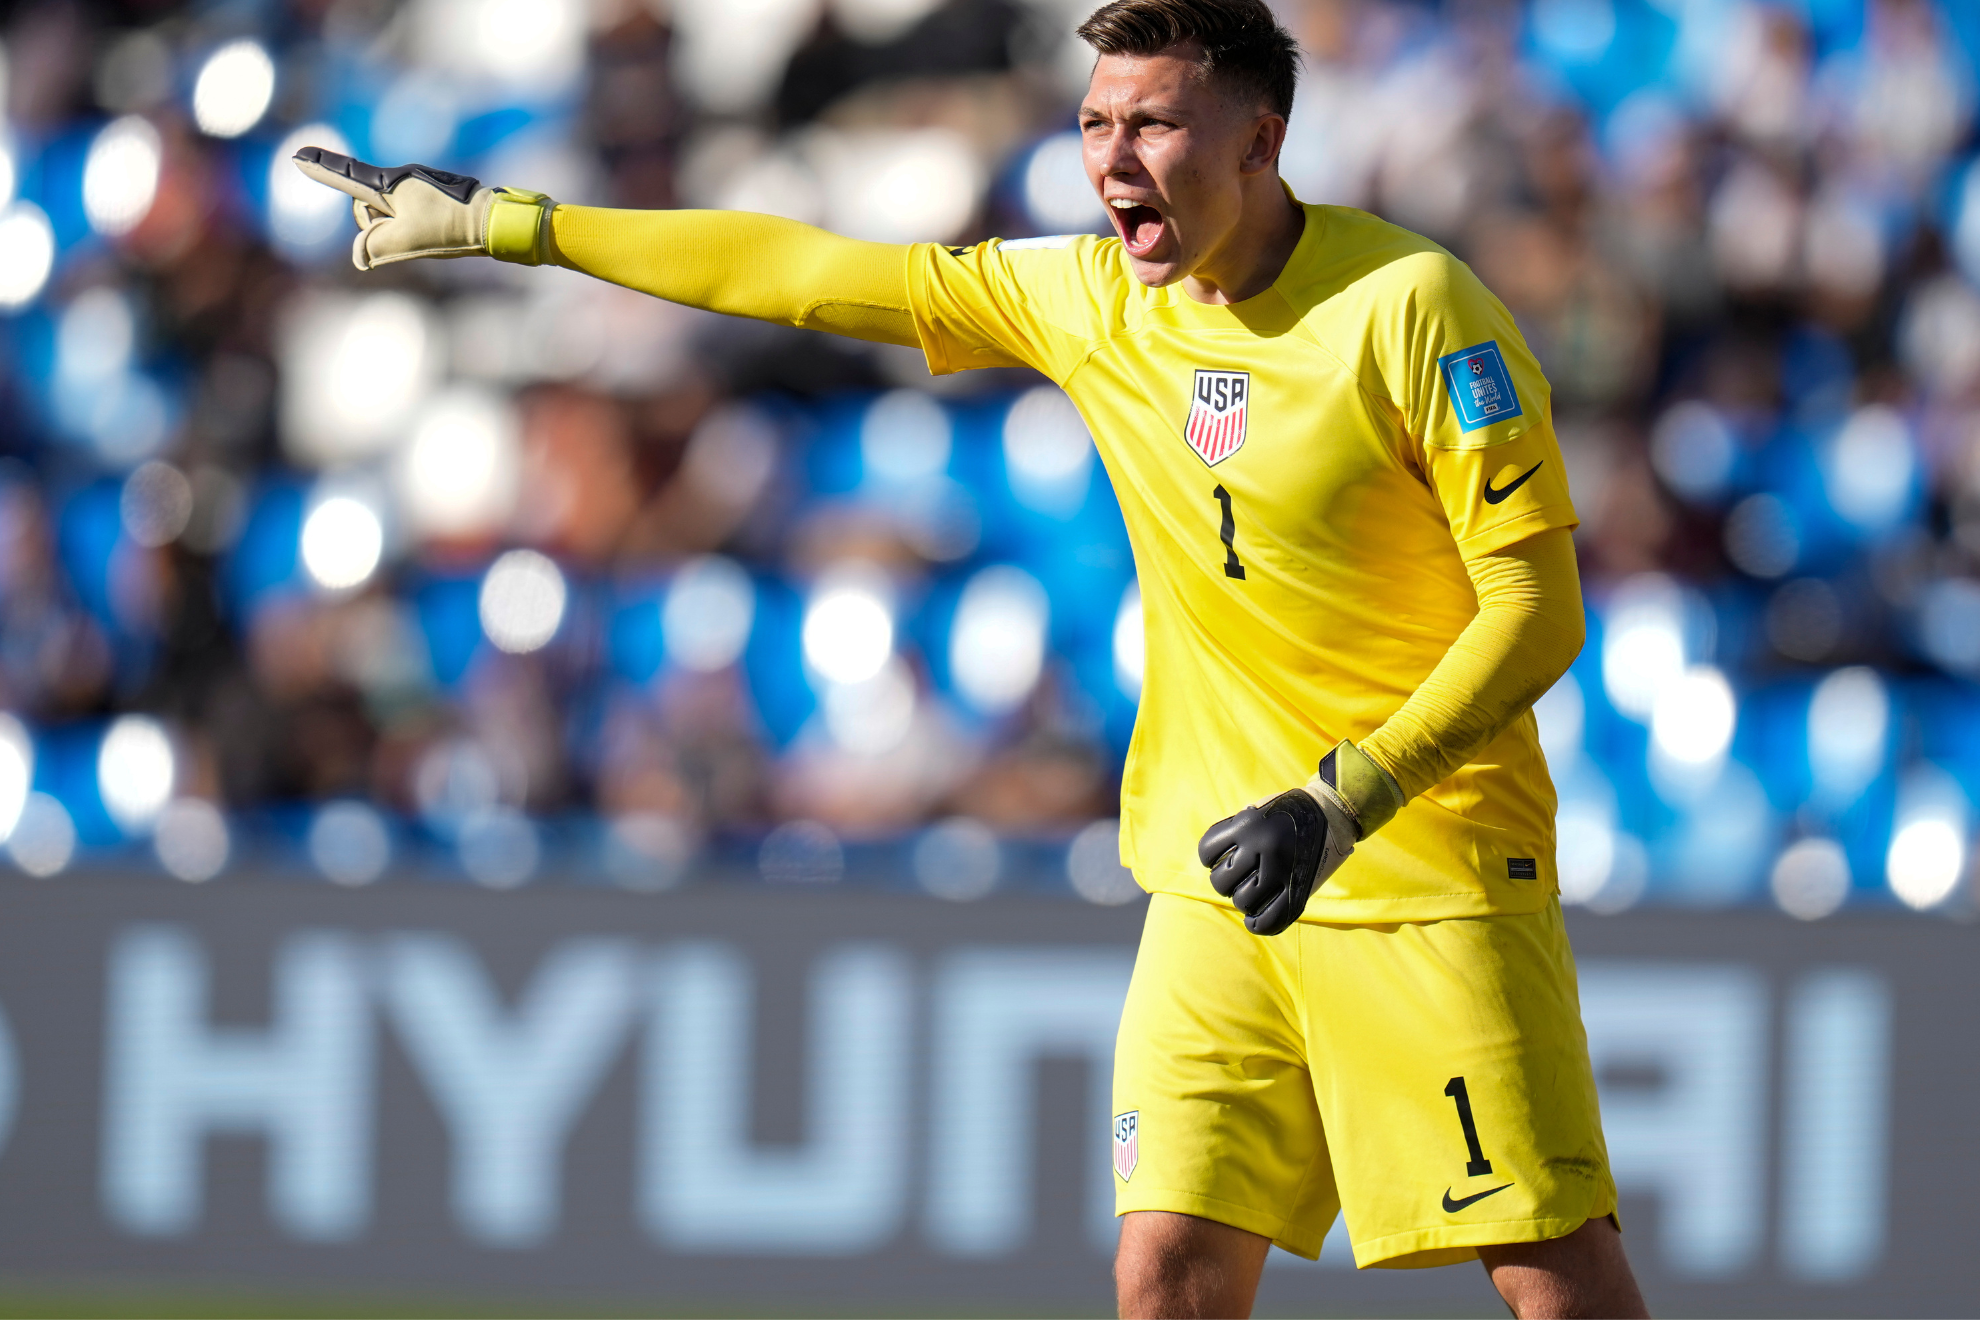 Chelsea's Gaga Slonina is one of the USMNT's goalkeepers for the Gold Cup.